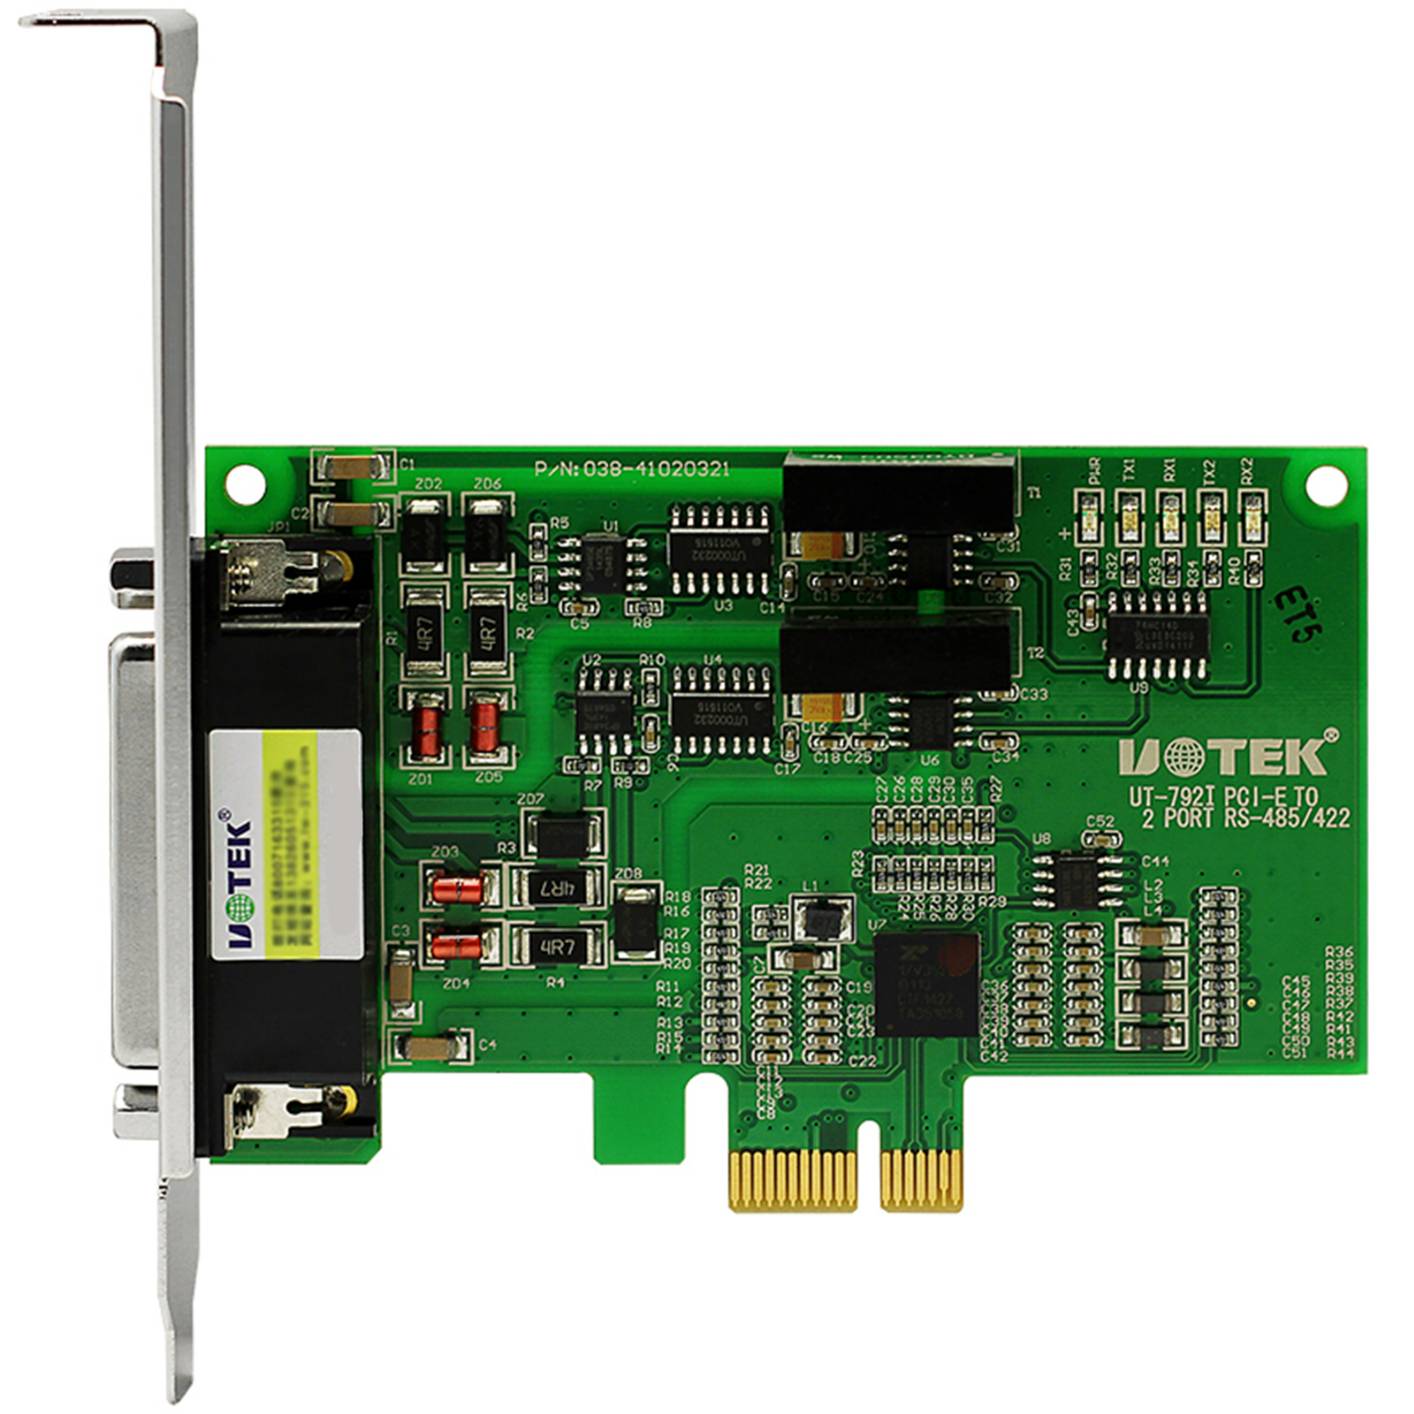 UOTEK PCI Express to RS485 Adapter 2 Ports, High-Speed PCIE to RS485 RS422 Serial Expansion Card Industrial Grade for Computer Motherboard Serial Card 9 Pin Com Port DB9 Male UT-792I